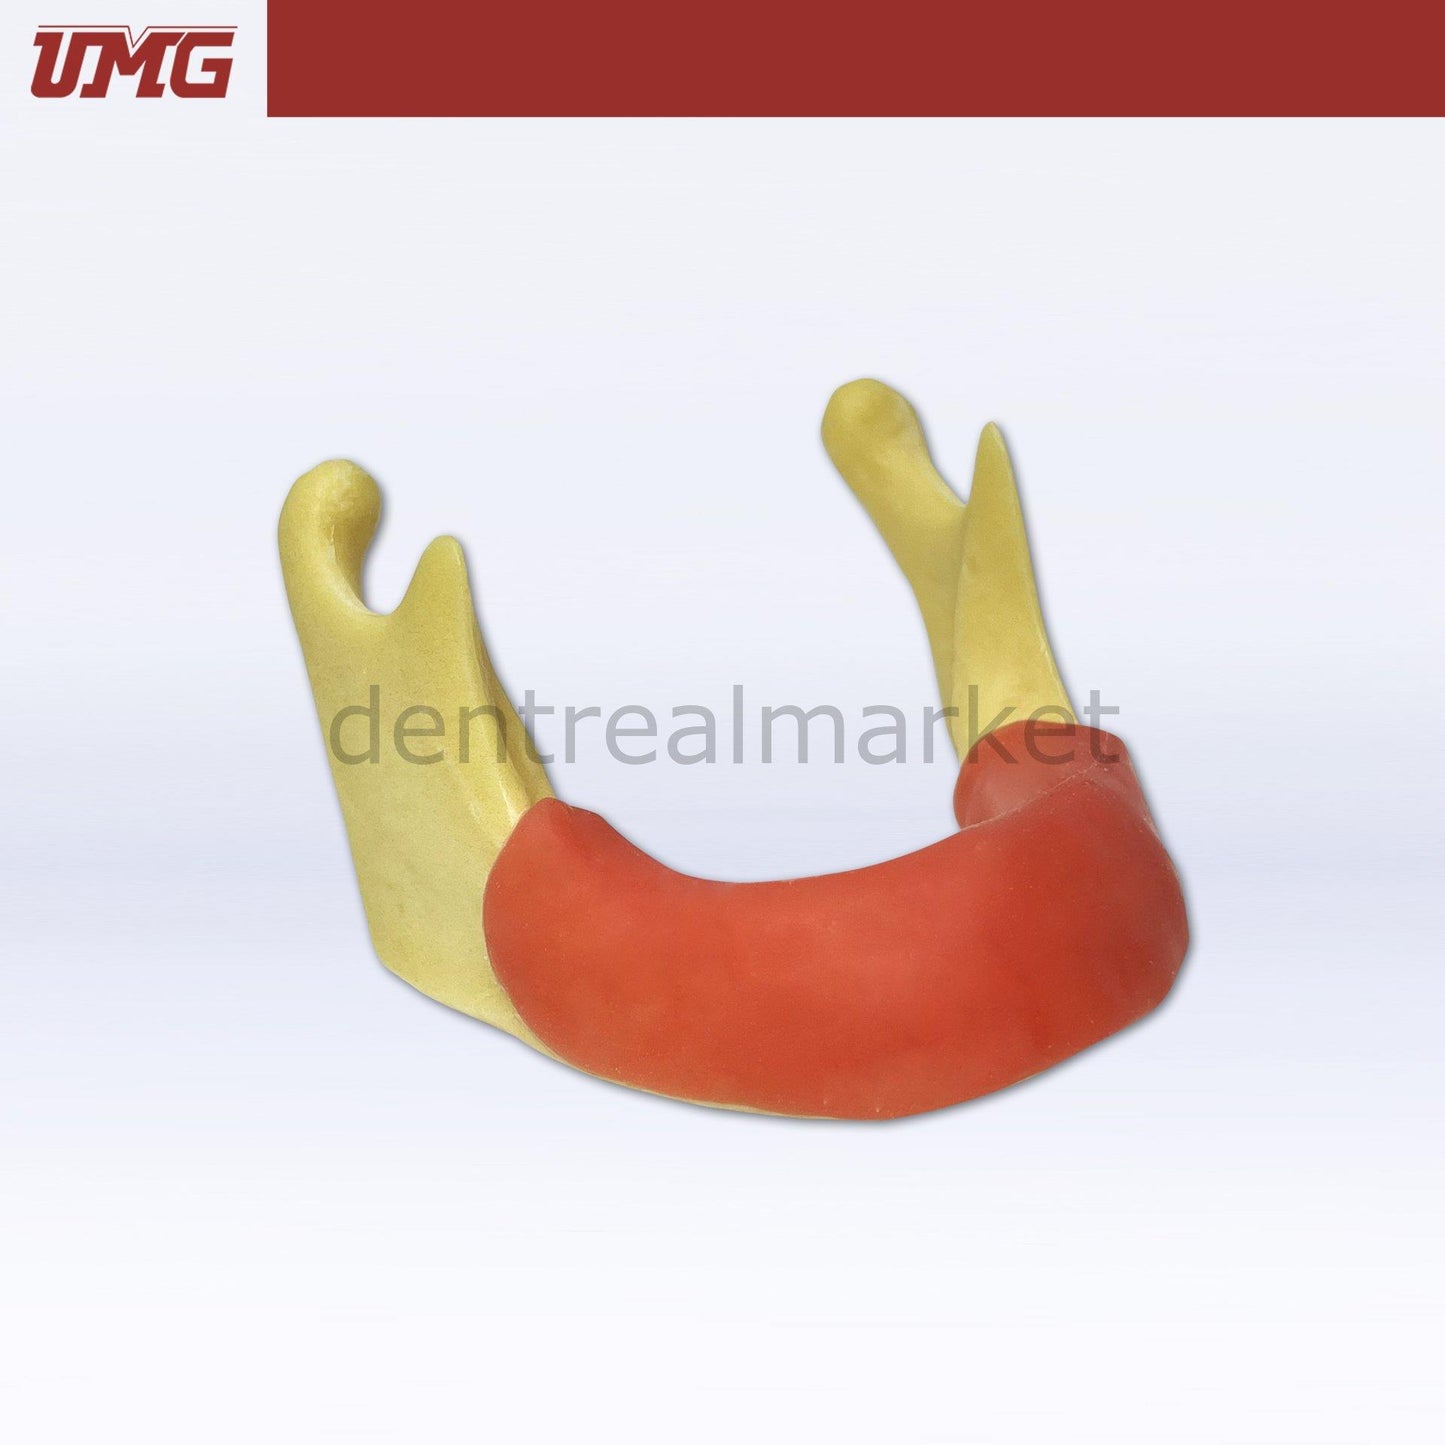 Umg Model Anatomically Shaped Bone Mandible for Implant Placement Application - UM-Z12